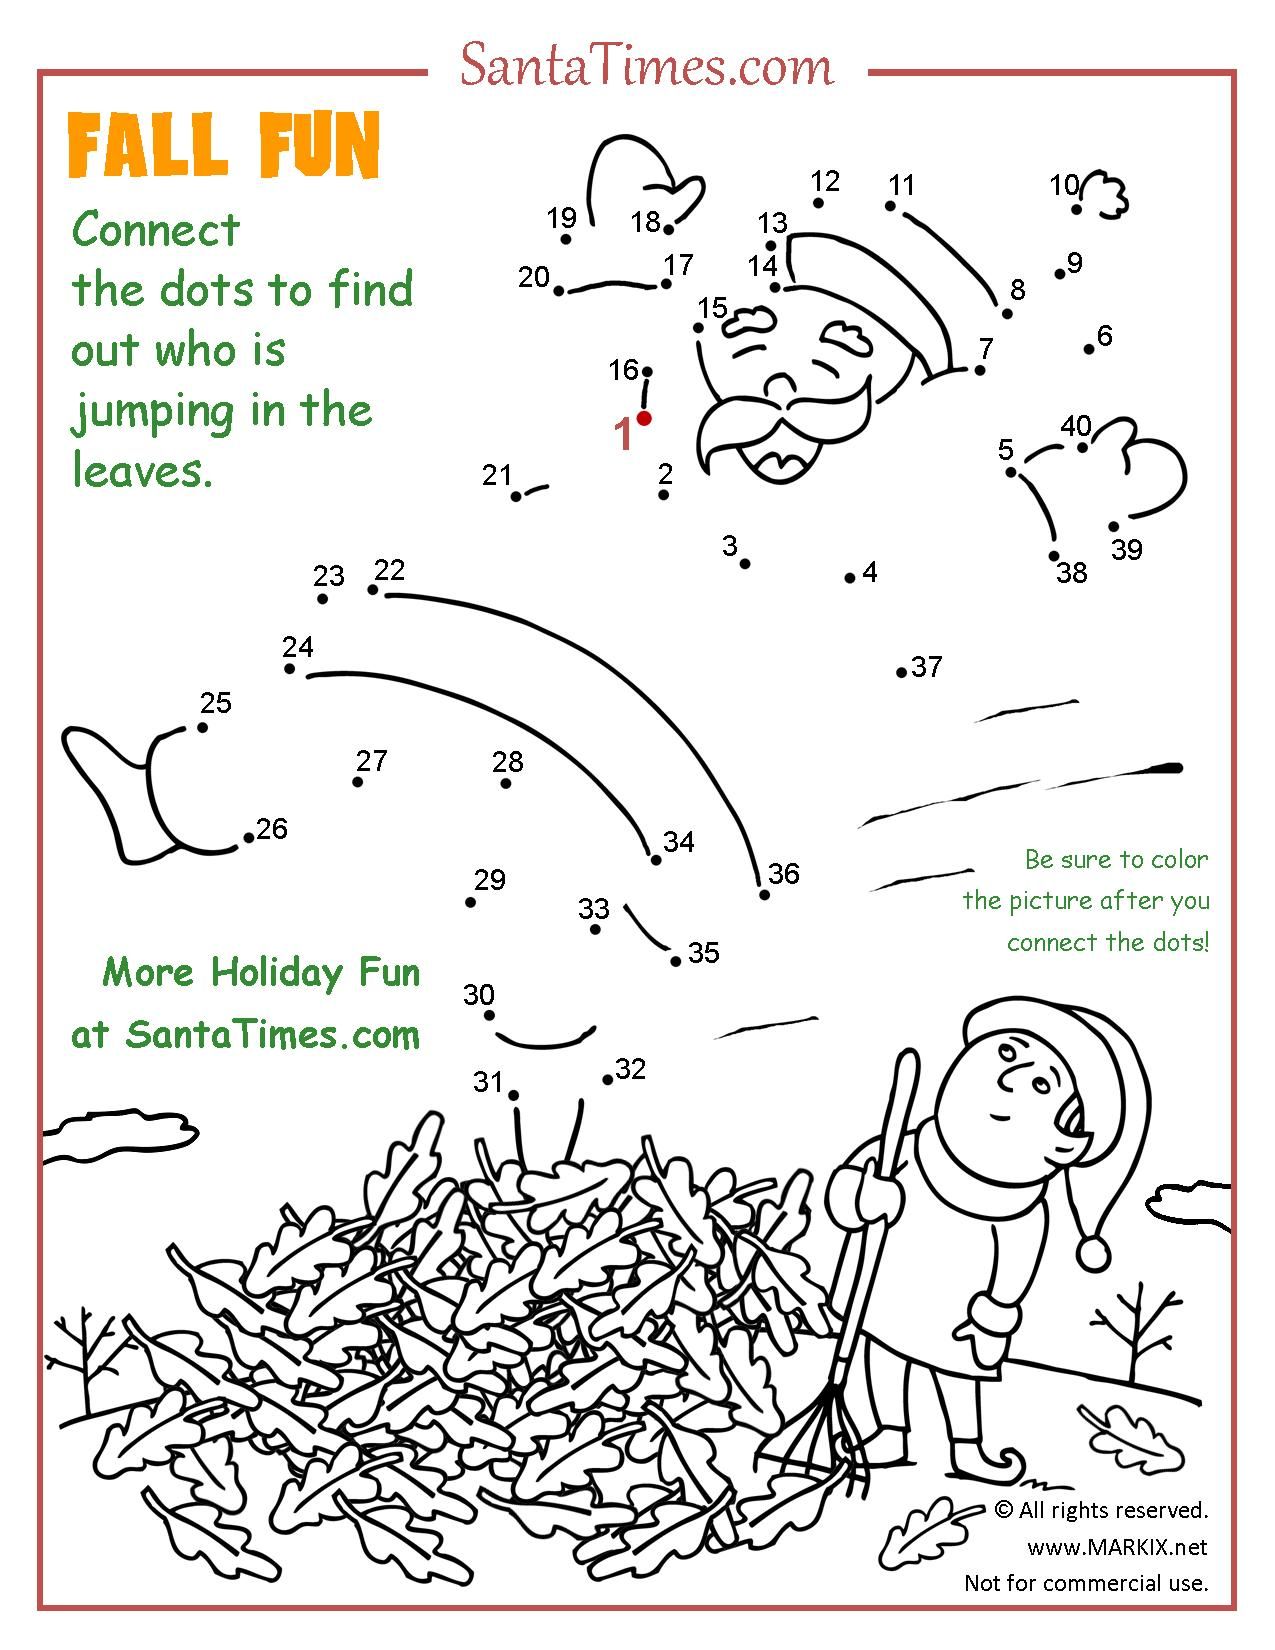 Fall Fun at the North Pole Printable Dot-to-dot. Connect the dots